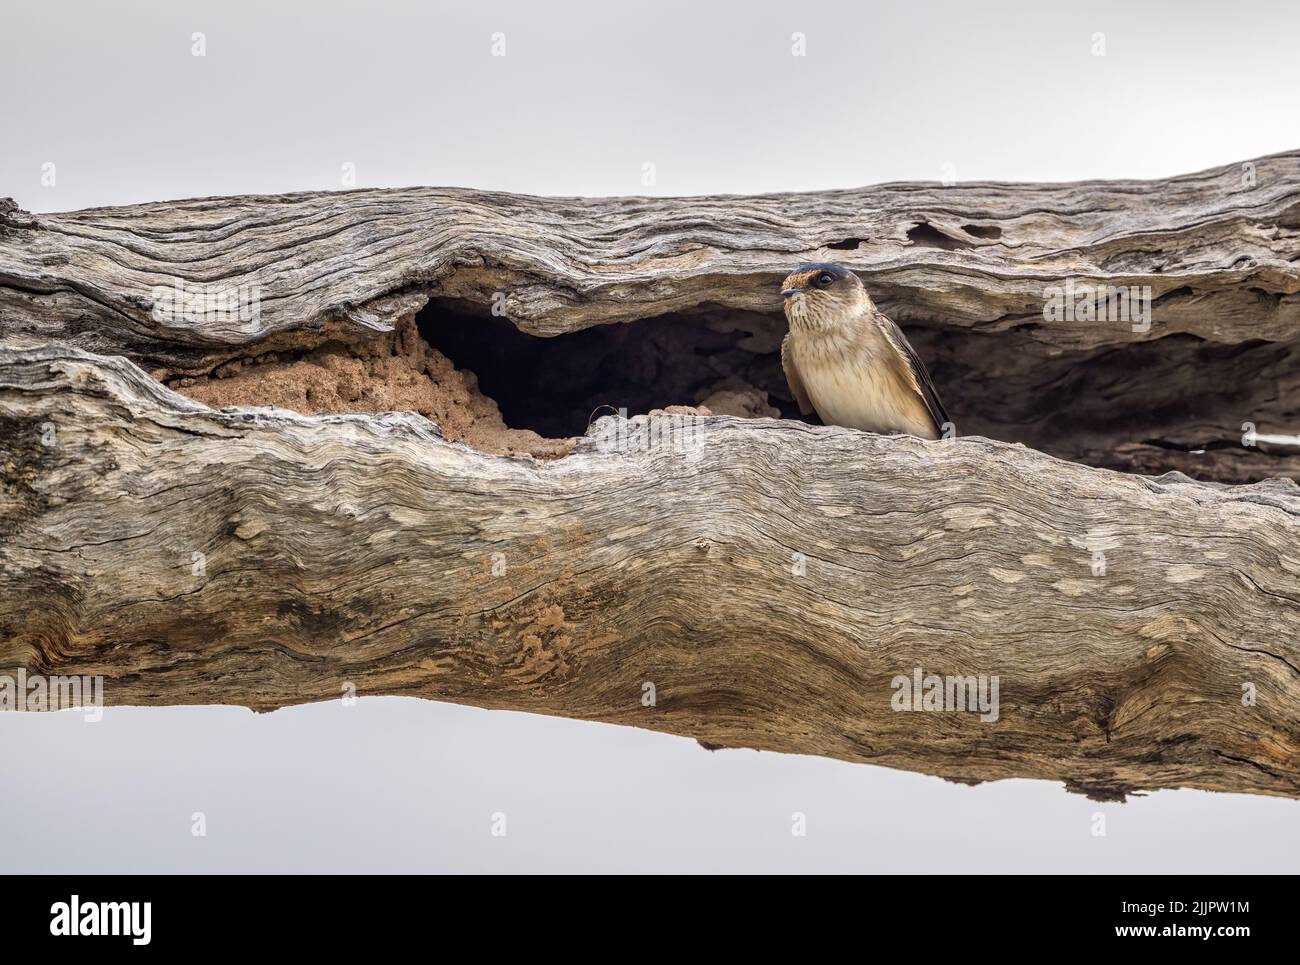 A Tree Martin perched on the entrance of its dead tree nesting hollow on an outback wetland waterhole in Western Queensland in Australia. Stock Photo